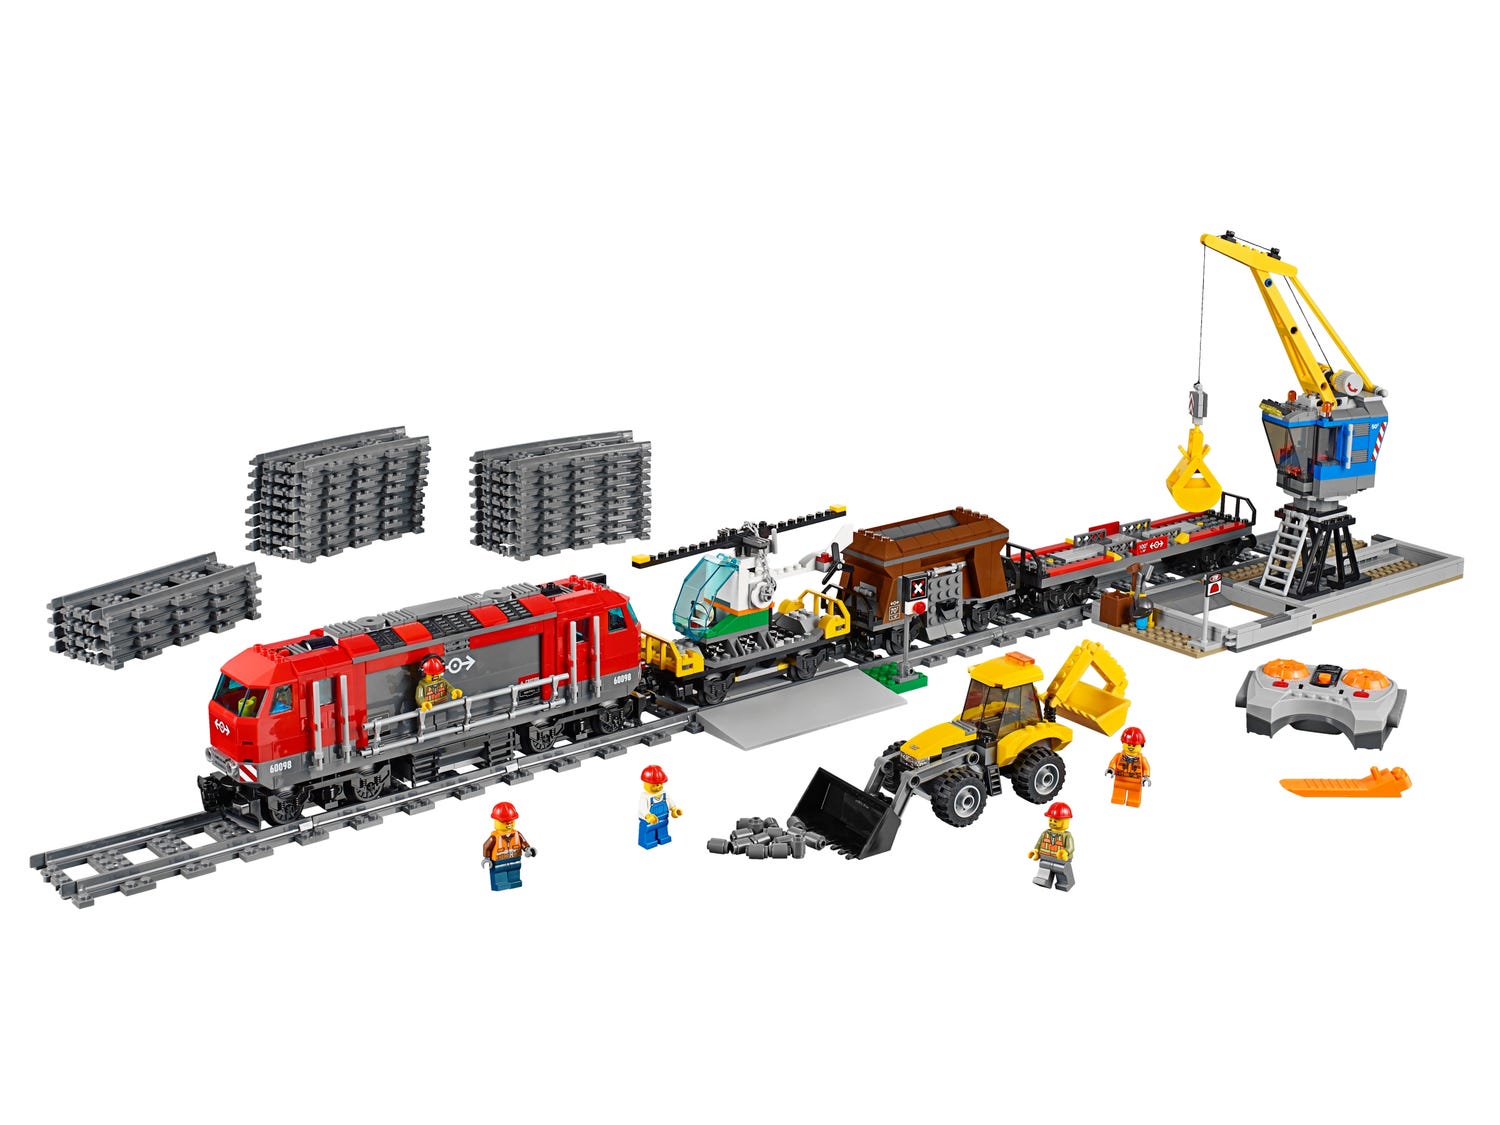 Heavy-Haul Train 60098 | City | Buy online at the Official LEGO® Shop US